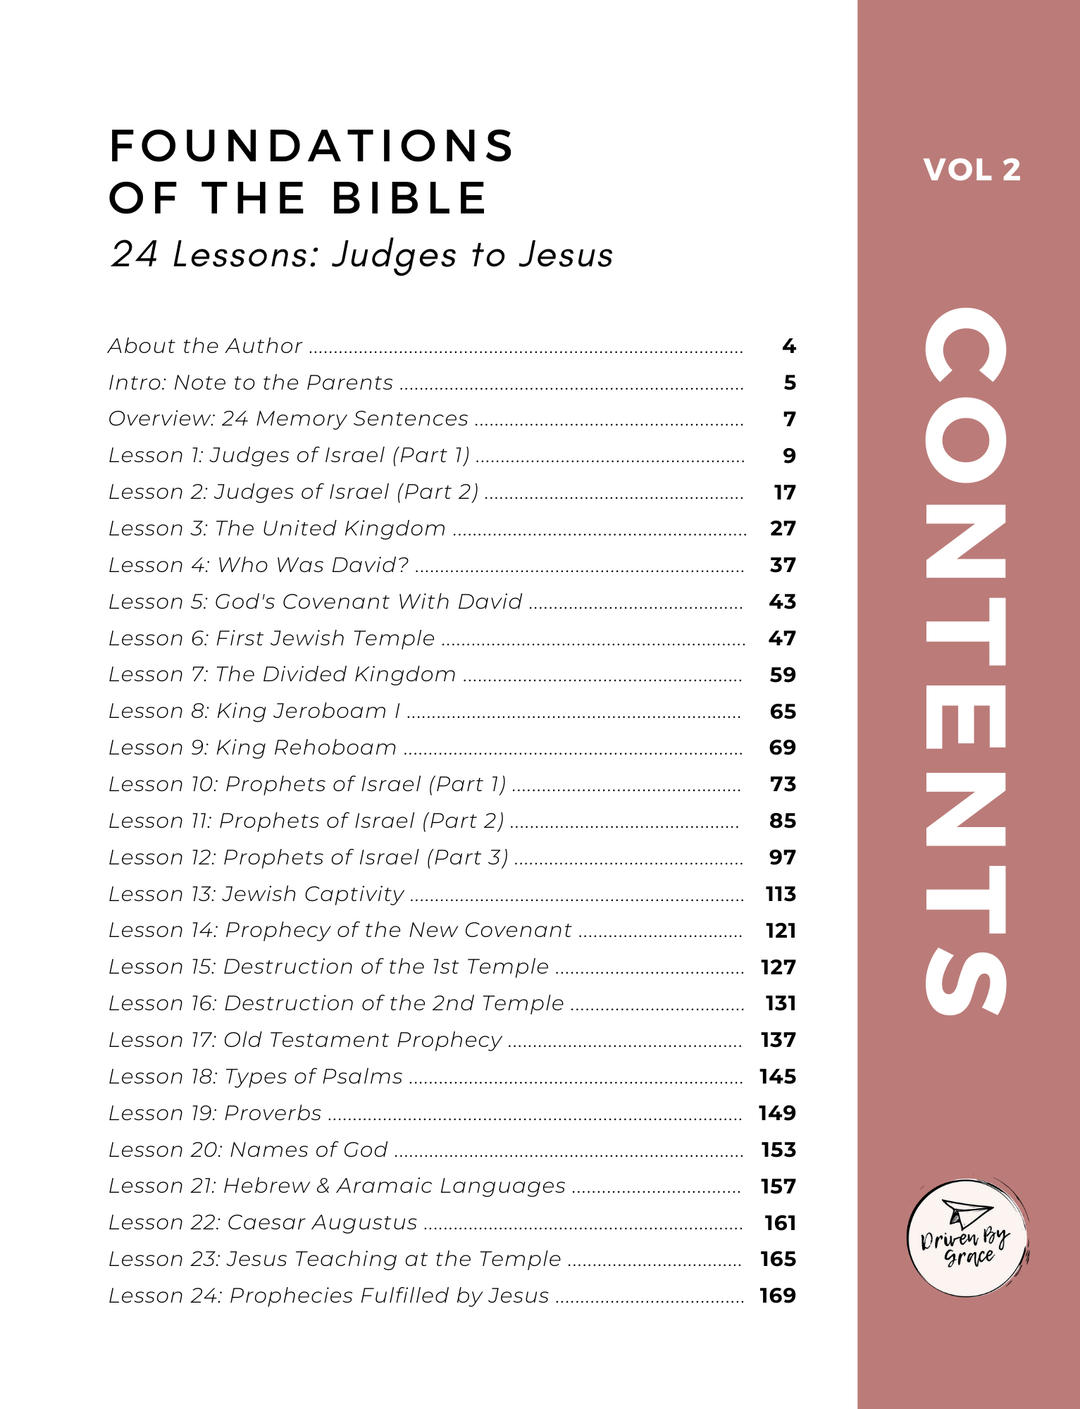 Foundations of the Bible Vol. 2: Judges to Jesus (Group License)